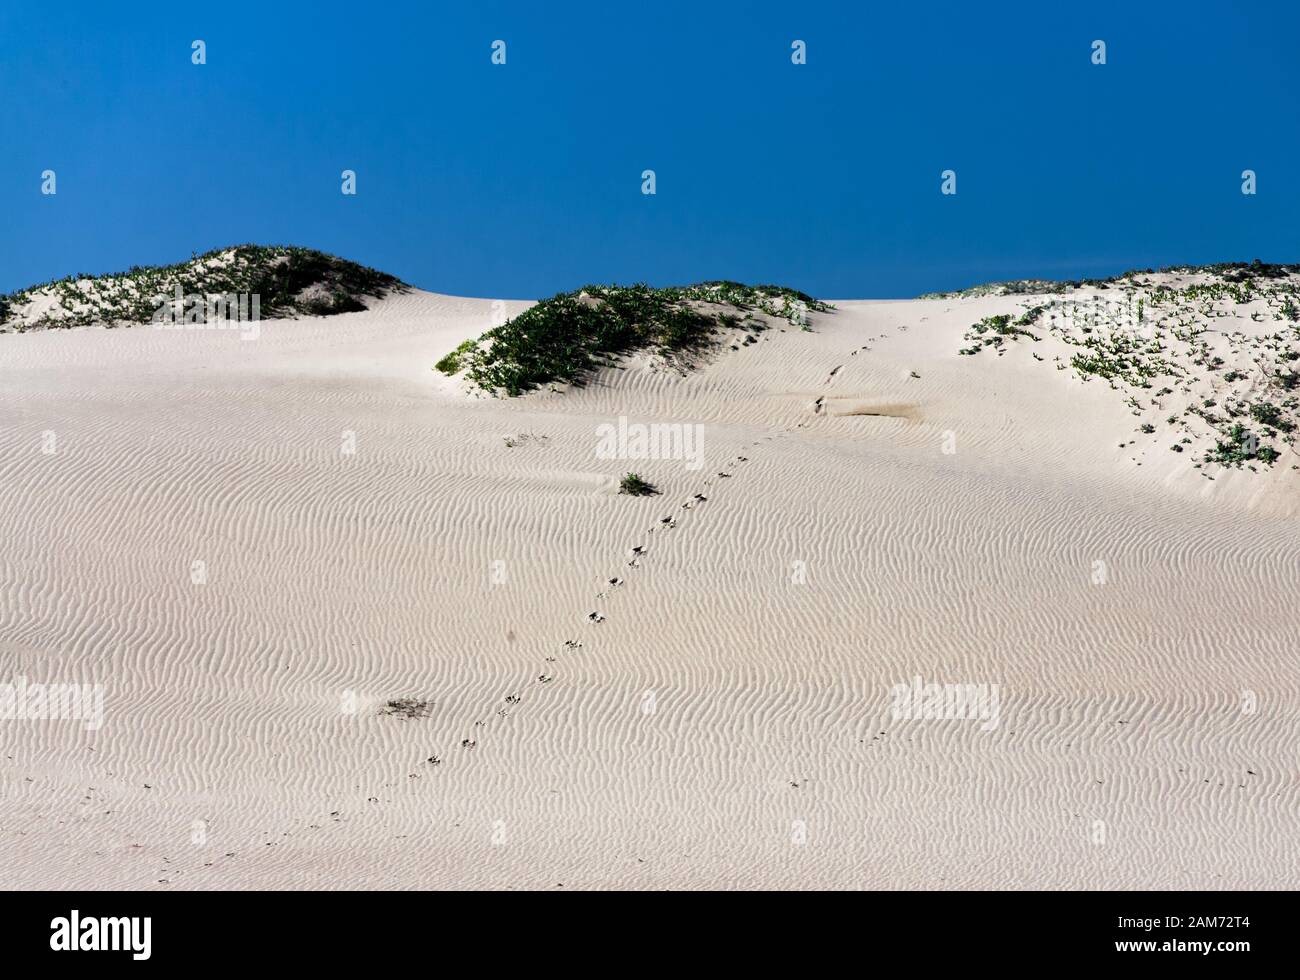 Animal tracks crossing the rippled surface of a sand dune on the California shore Stock Photo